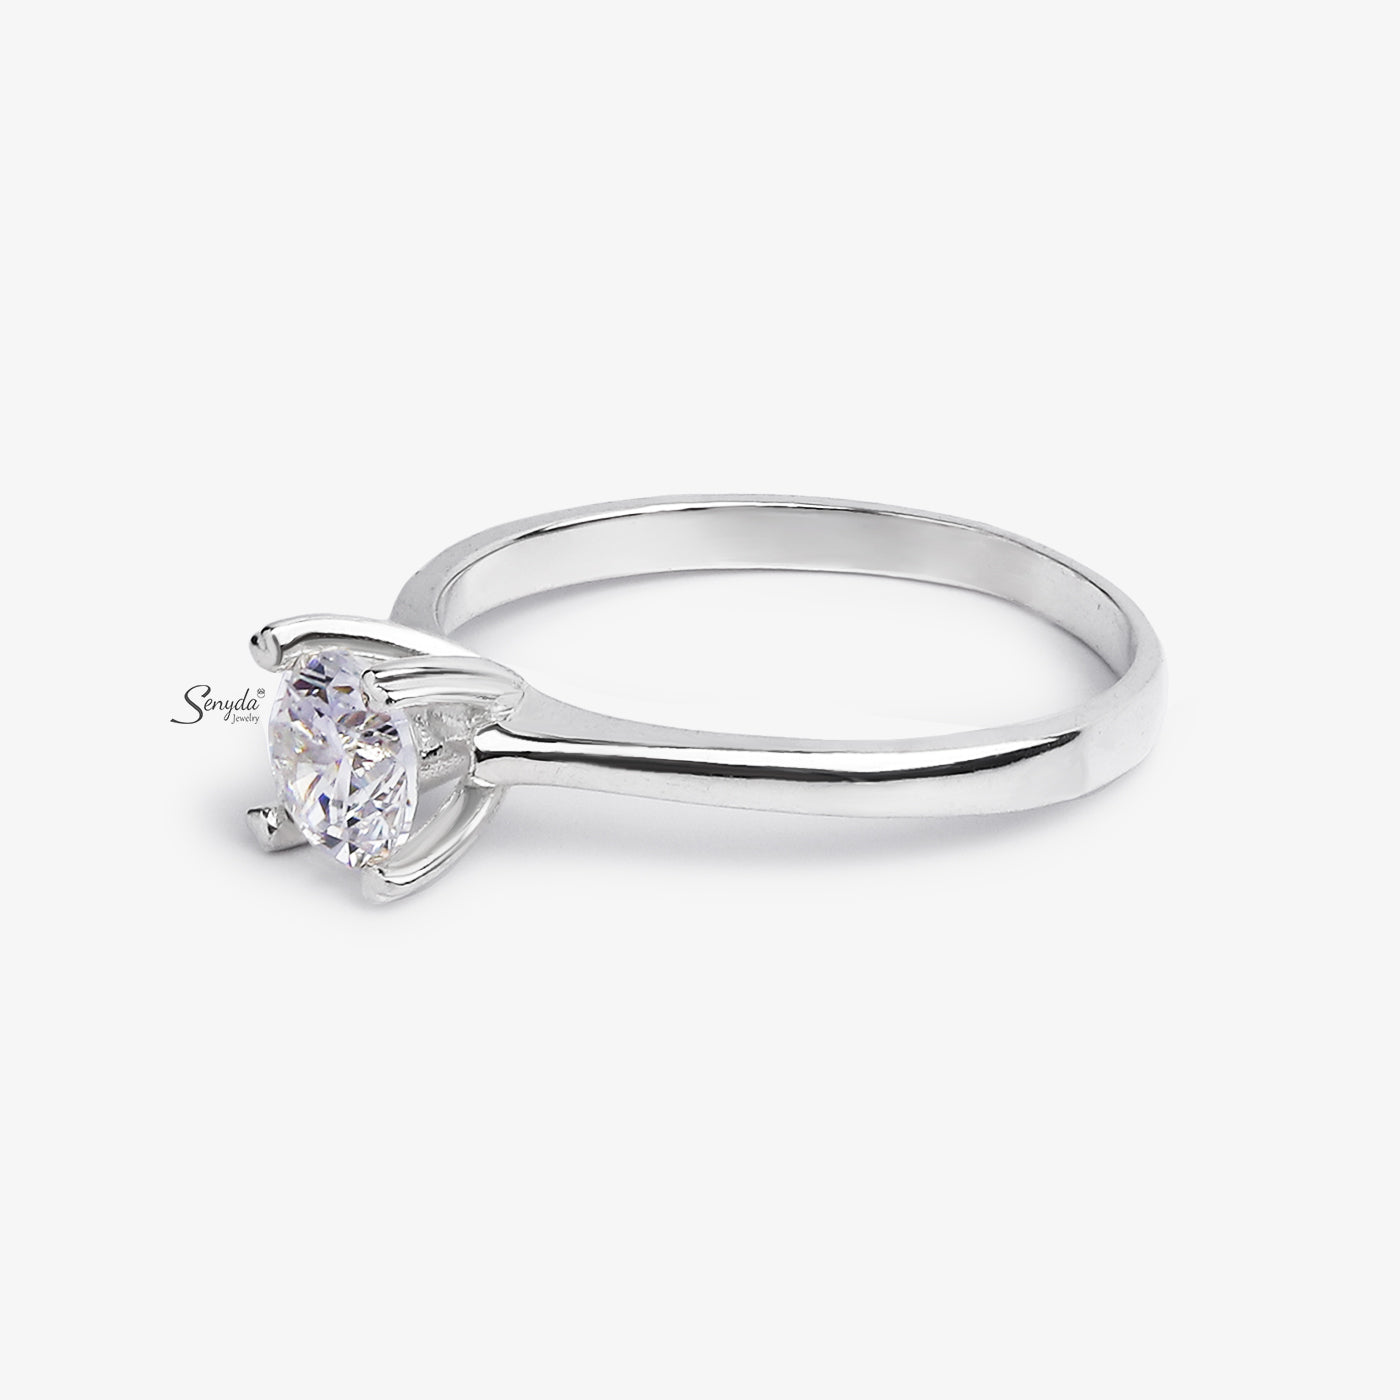 Sterling Silver 925 WYMM Solitaire Ring